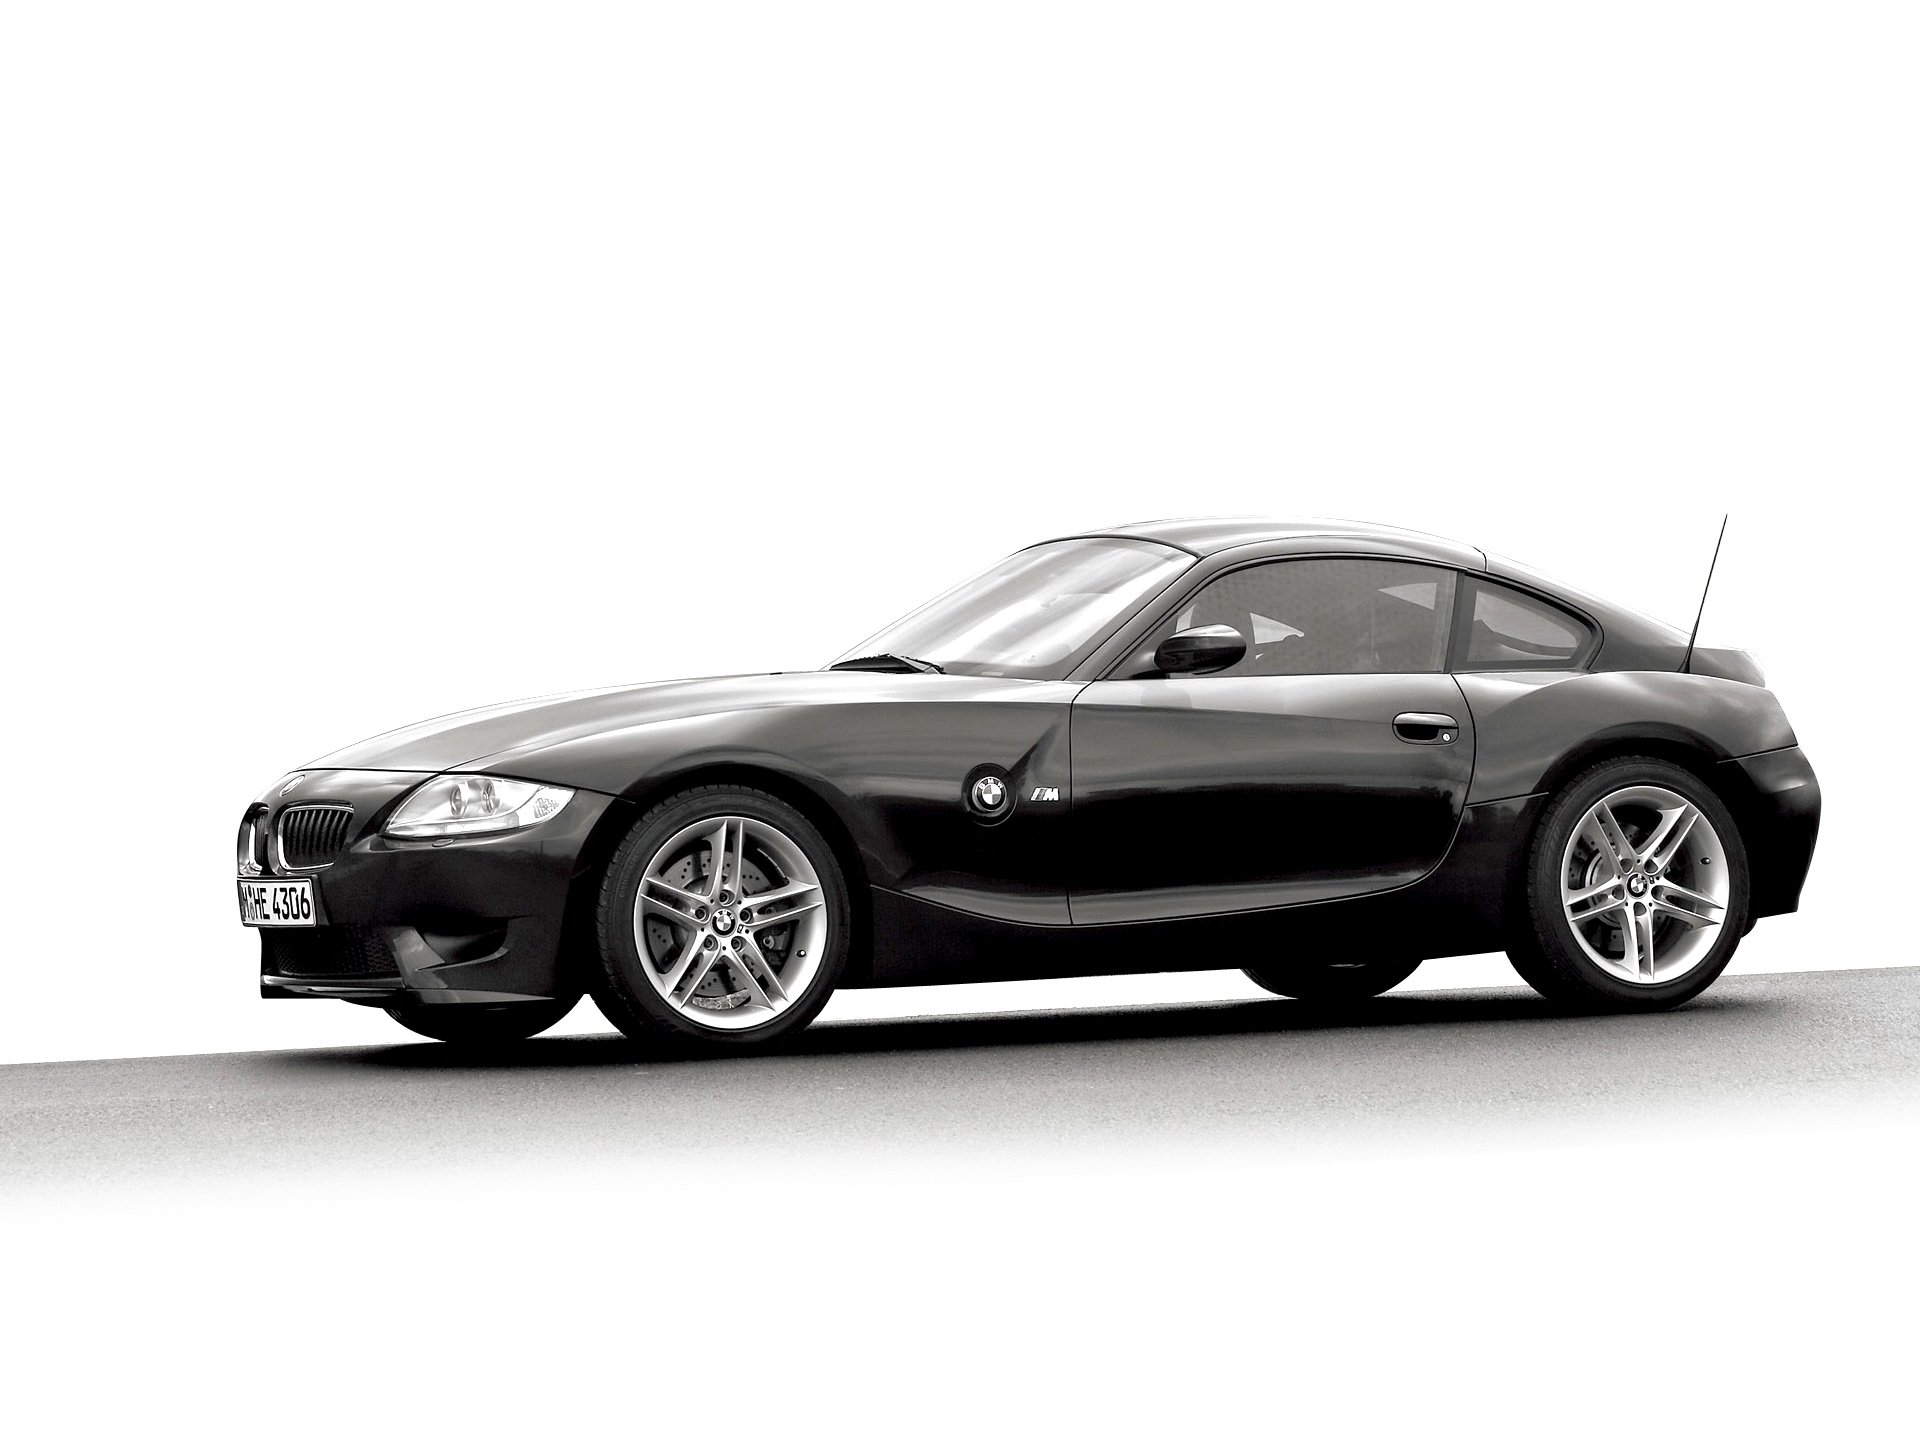 Bmw Z4 M Roadster Full HD Wallpaper And Background